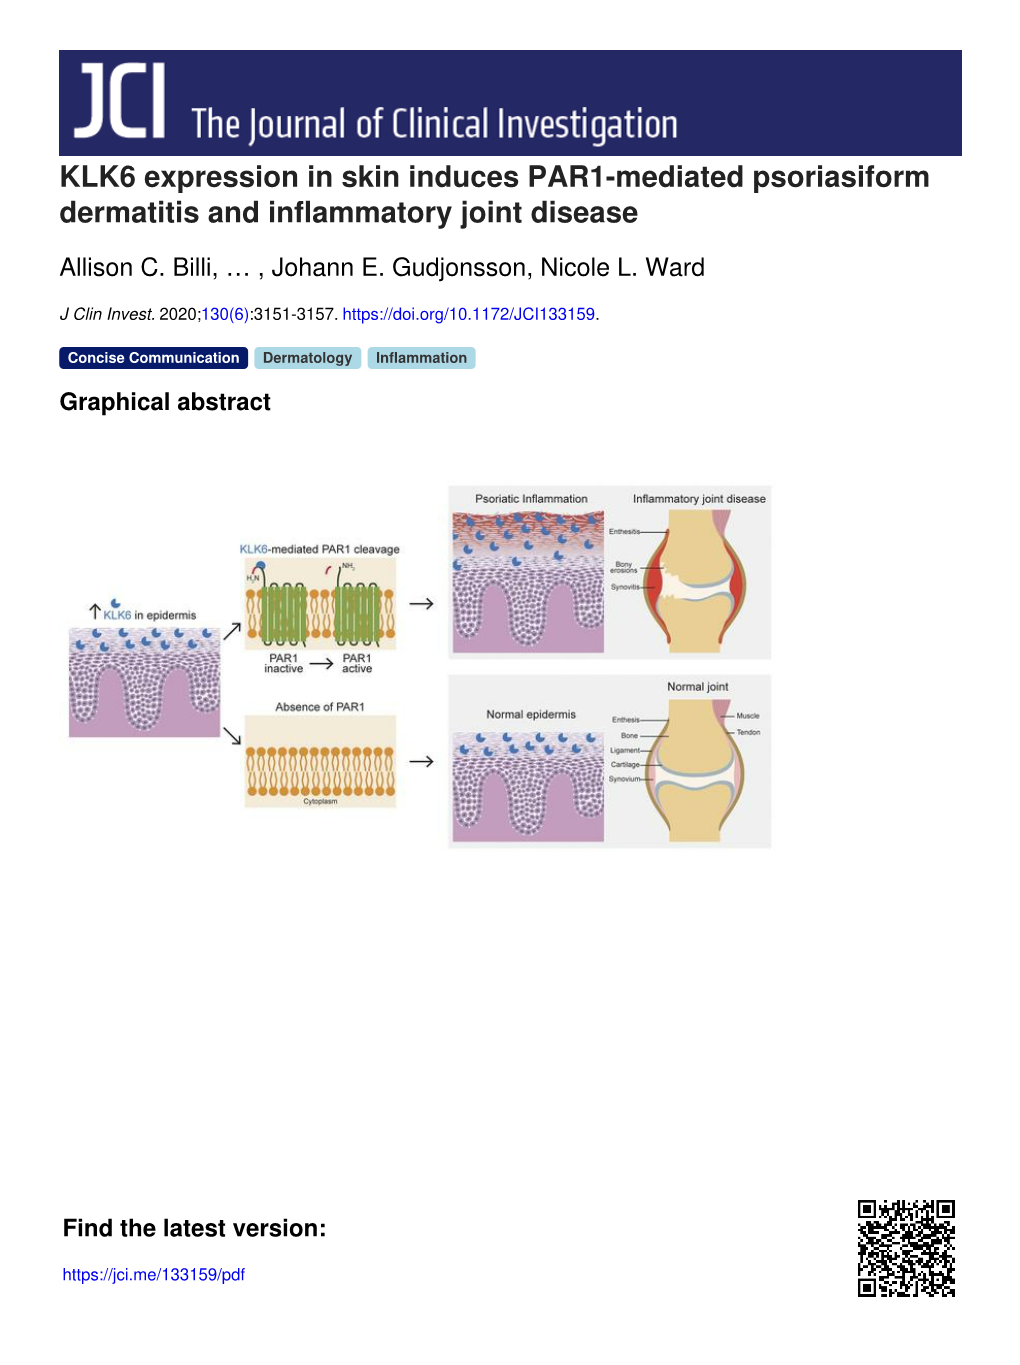 KLK6 Expression in Skin Induces PAR1-Mediated Psoriasiform Dermatitis and Inflammatory Joint Disease